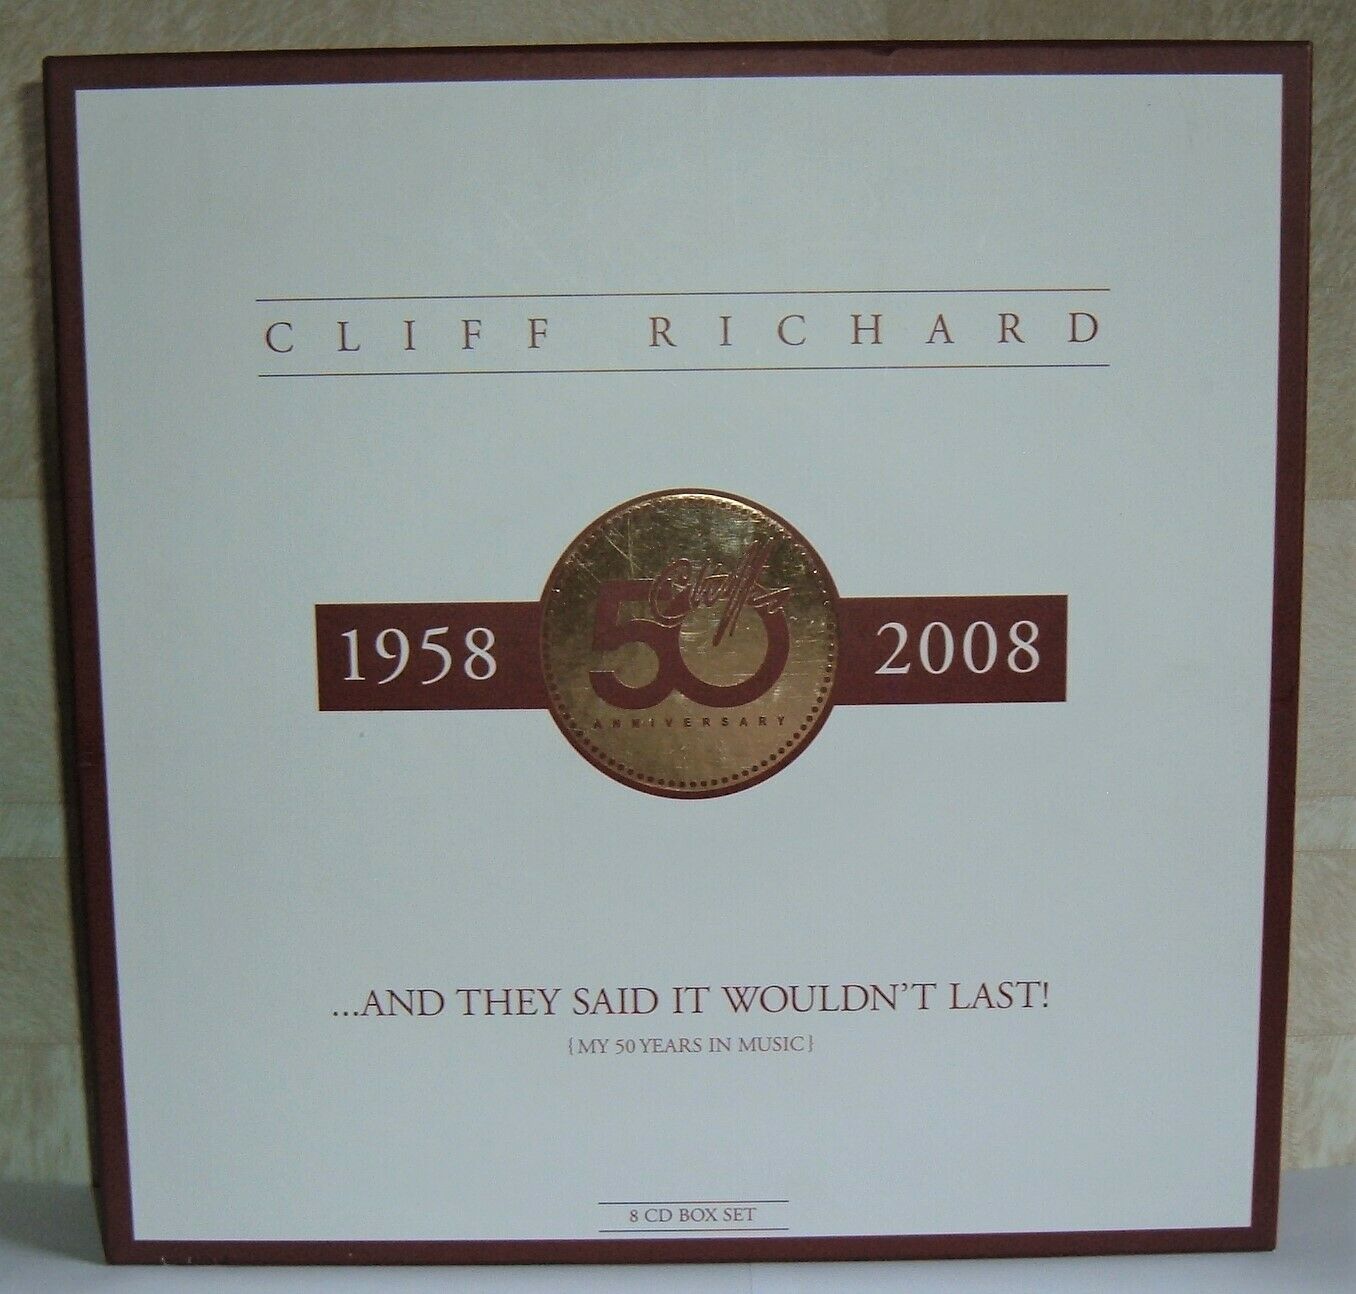 Cliff Richard 50th Anniversary Box Set And They Said It Wouldn't Last. MINT.